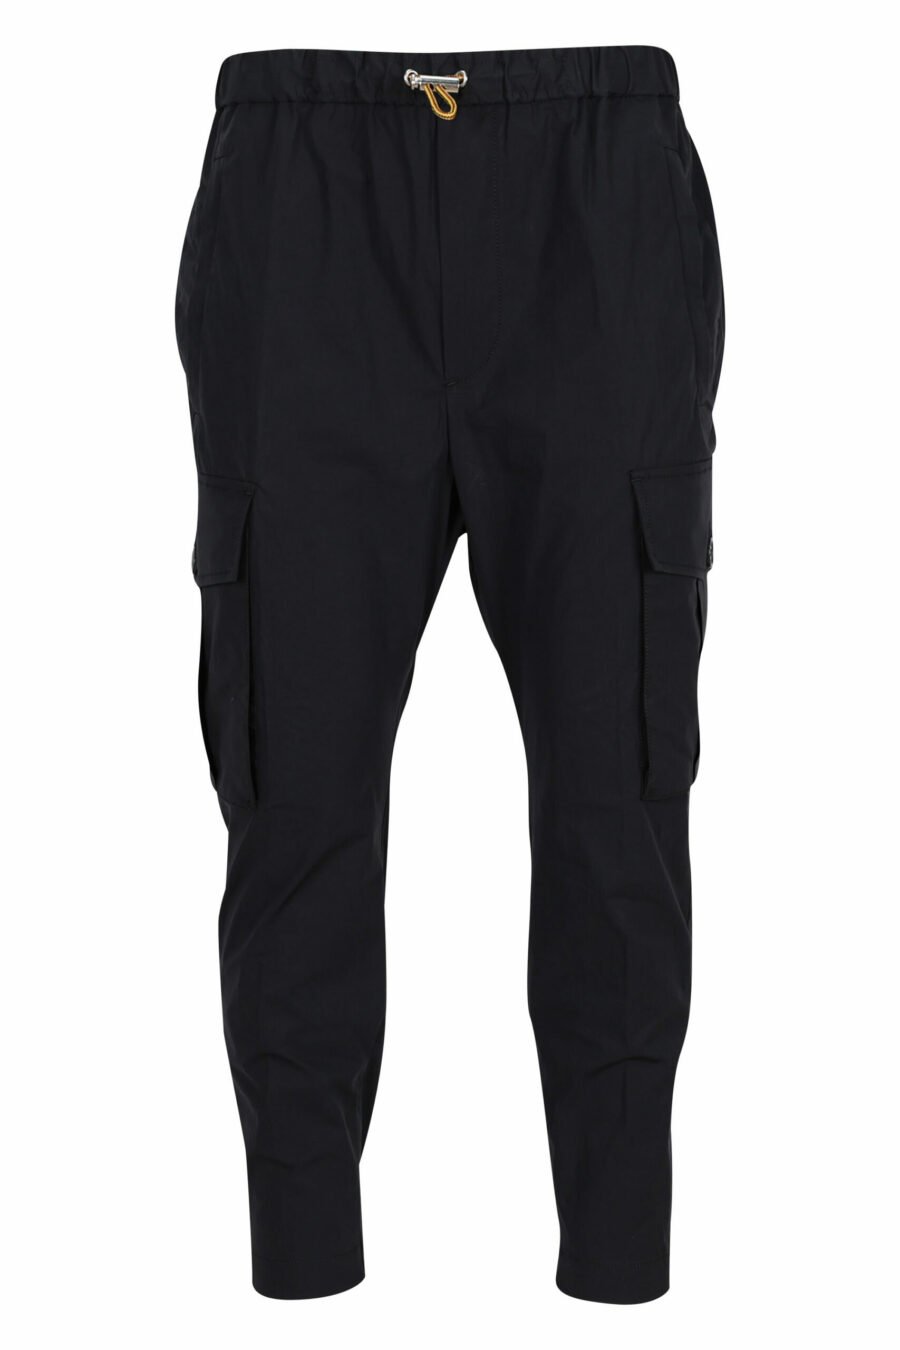 Black pully pant - 8054148060992 scaled